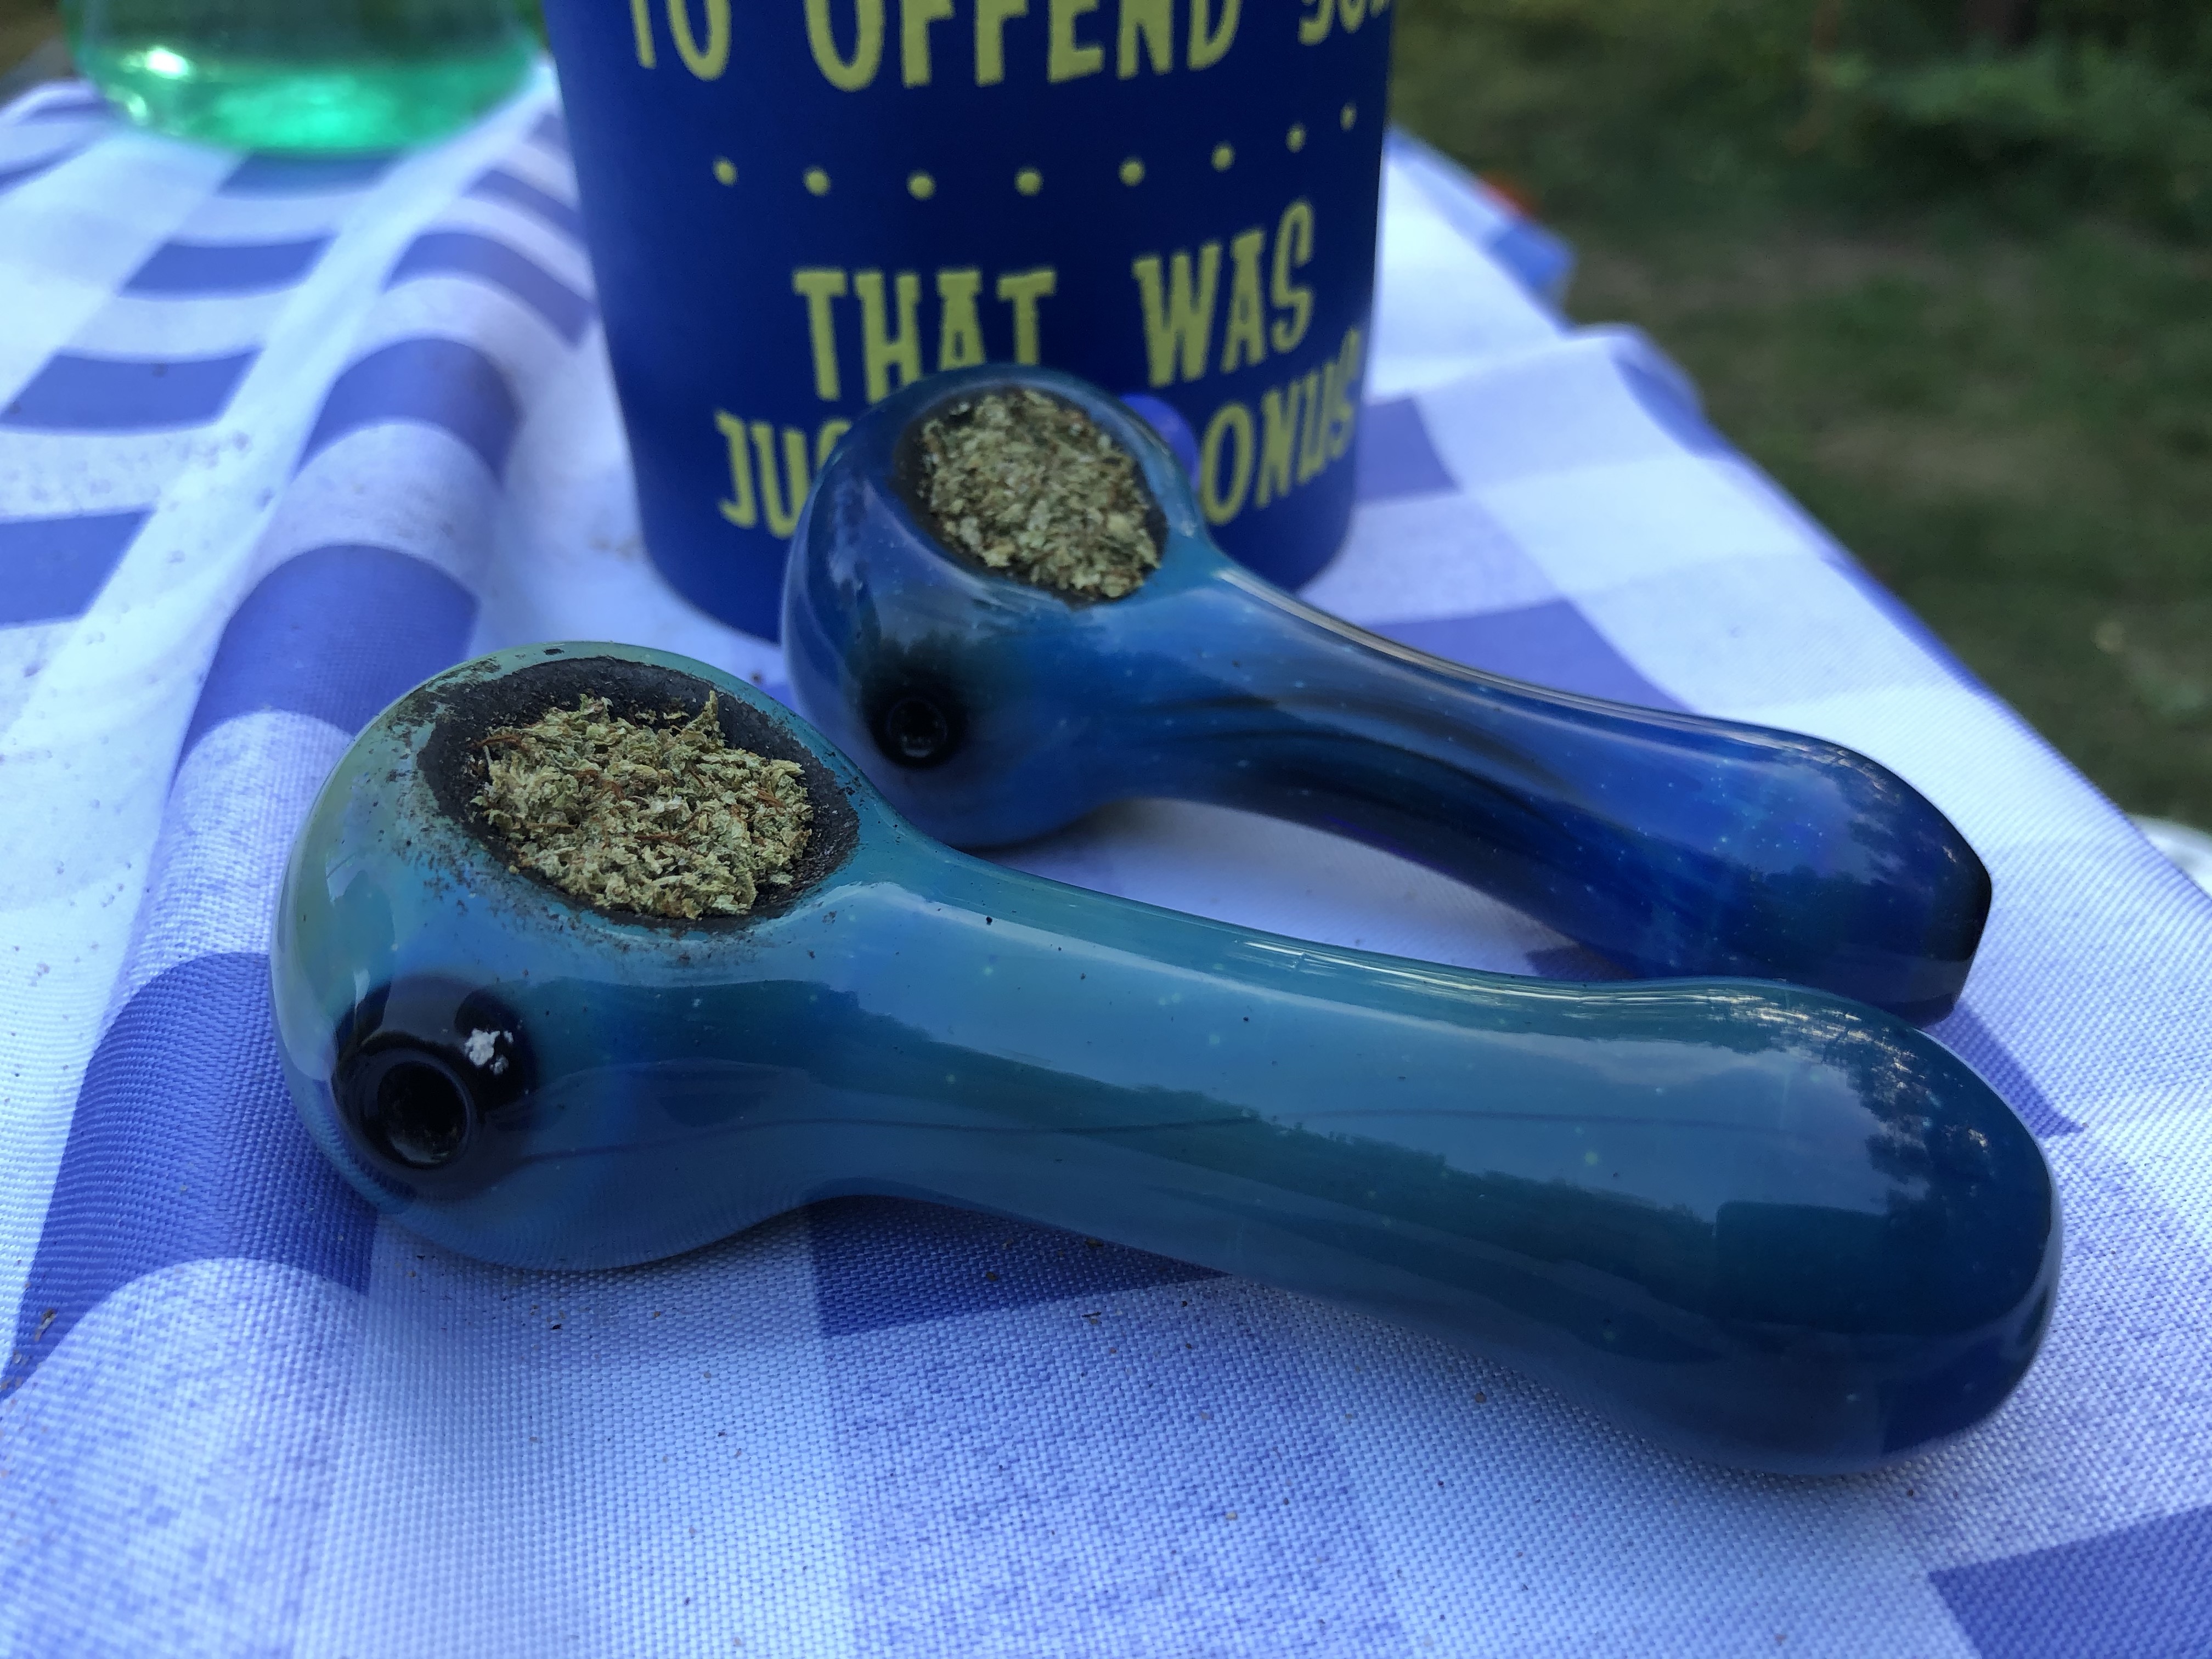 TWO BOWLS ARE BETTER THAN ONE